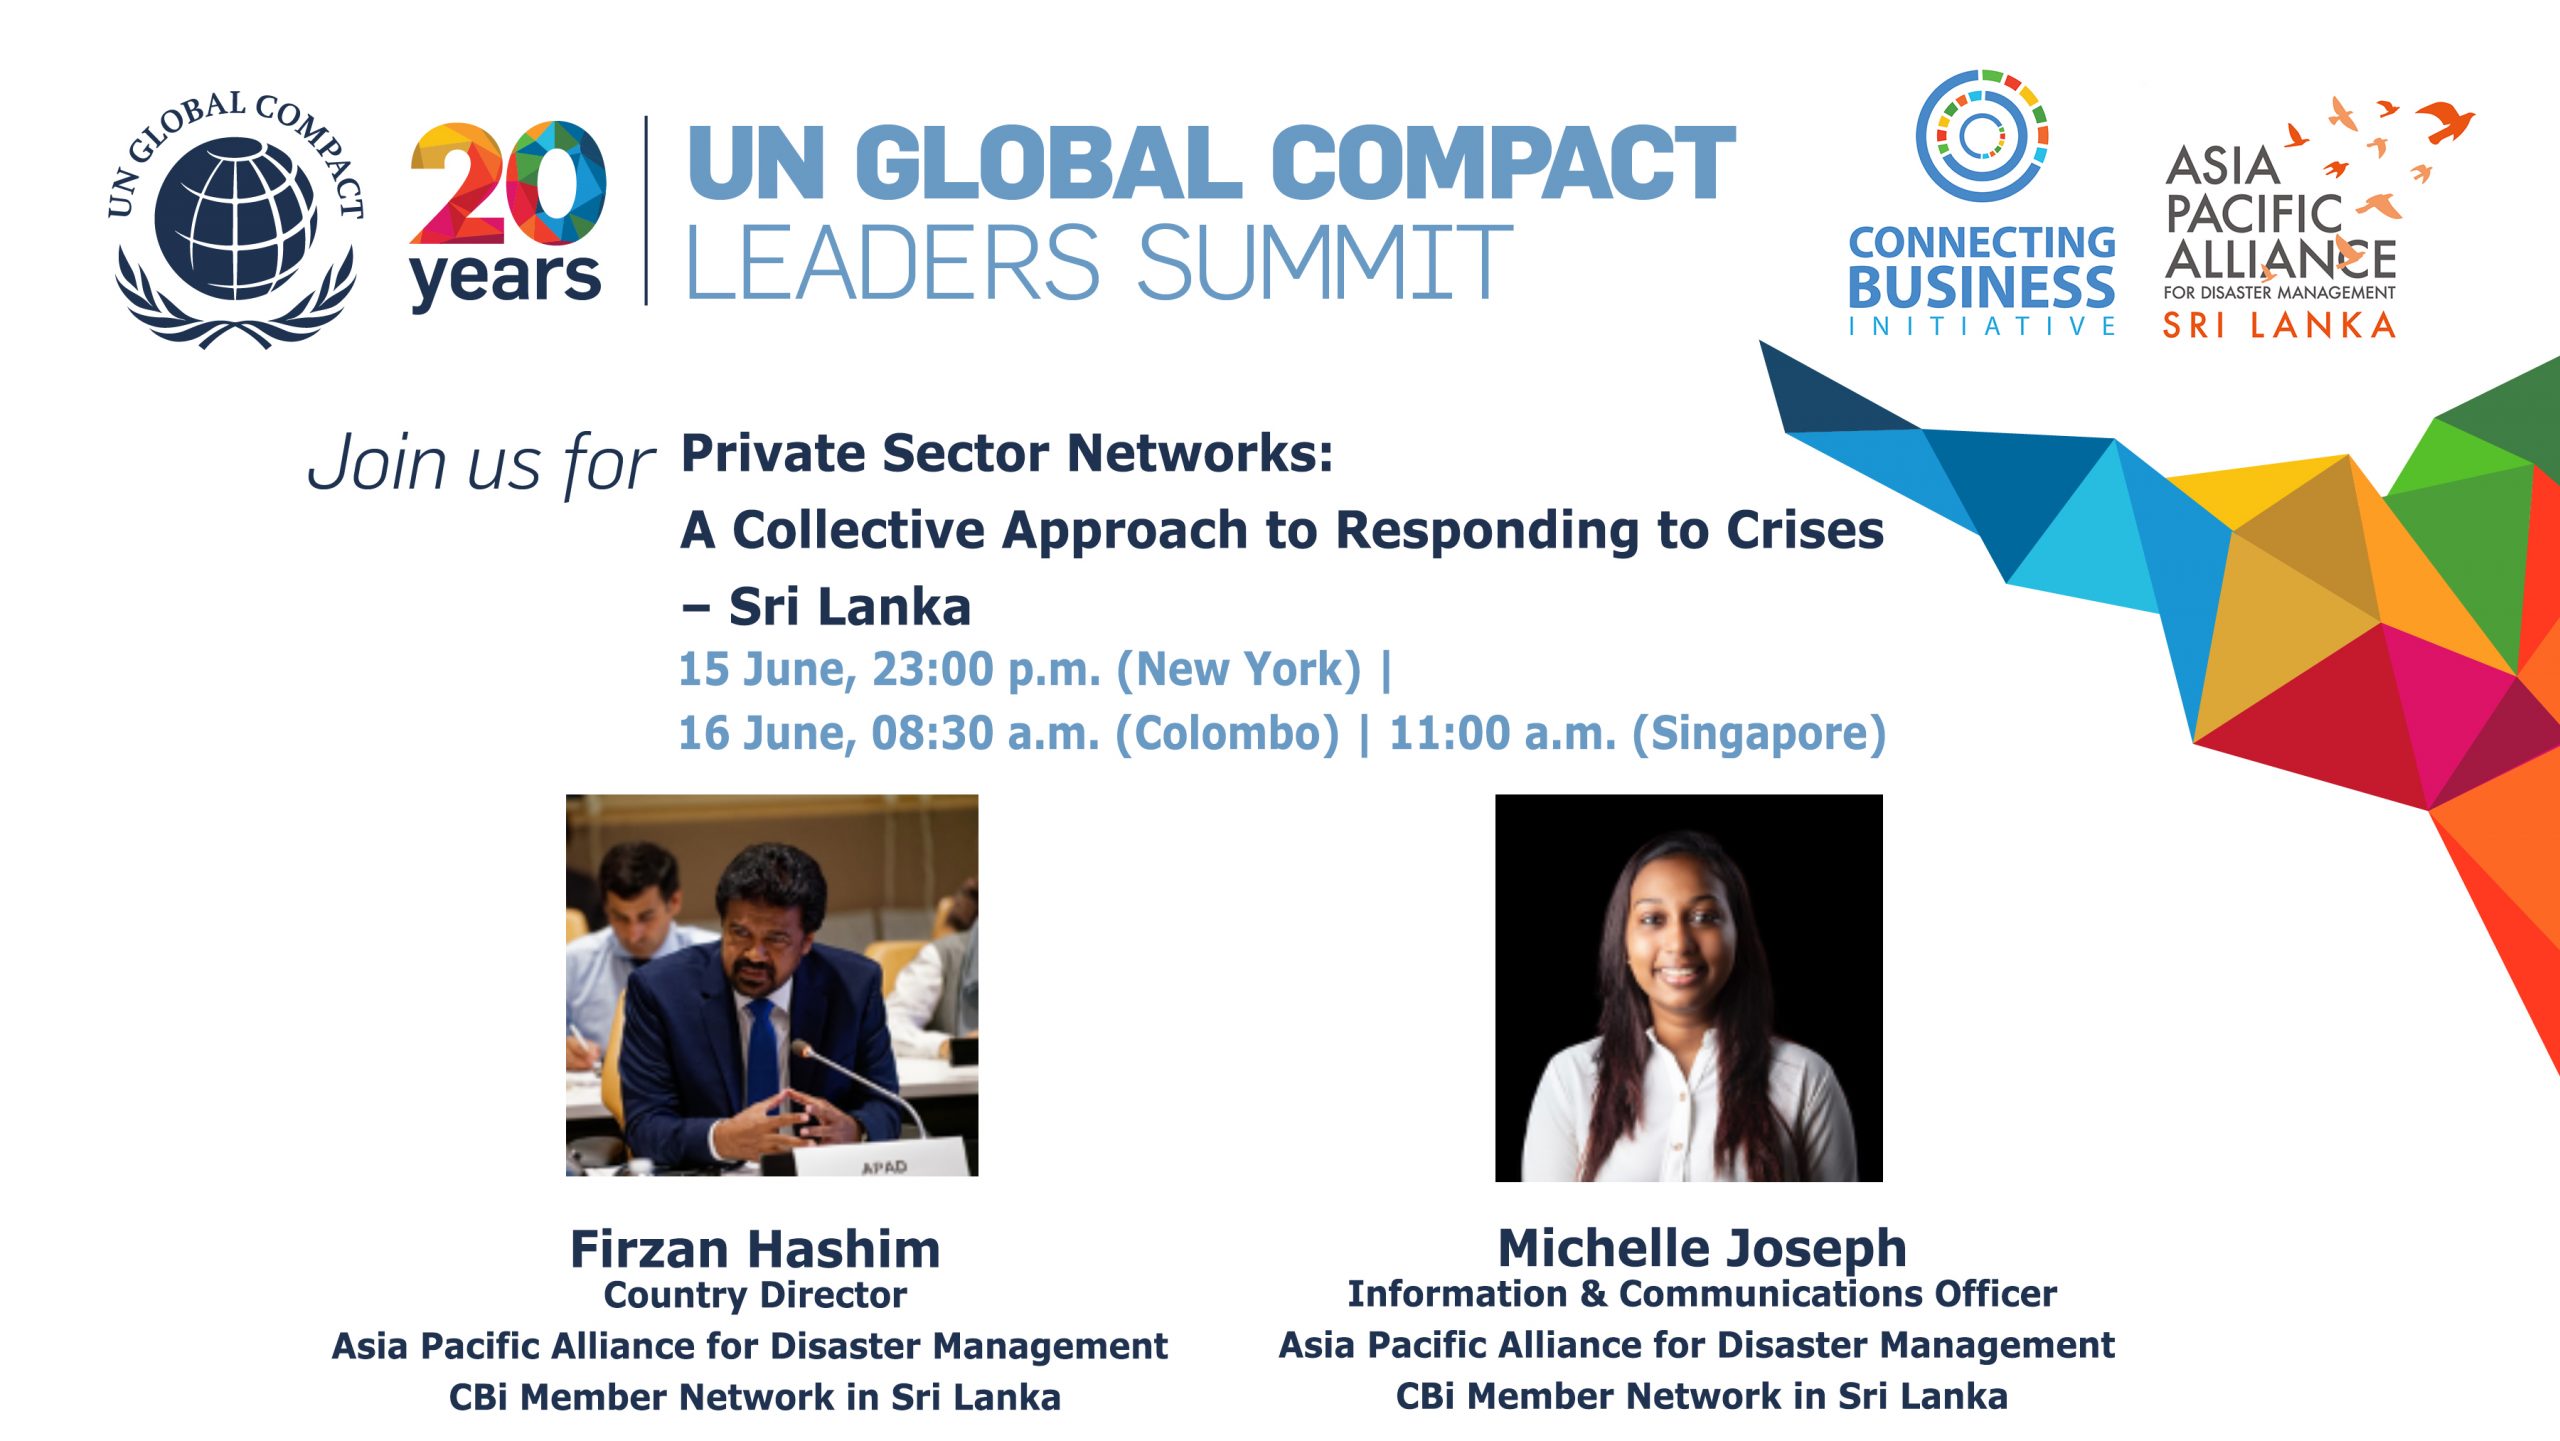 UN Global Compact Leaders Summit: 15th – 16th June 2020